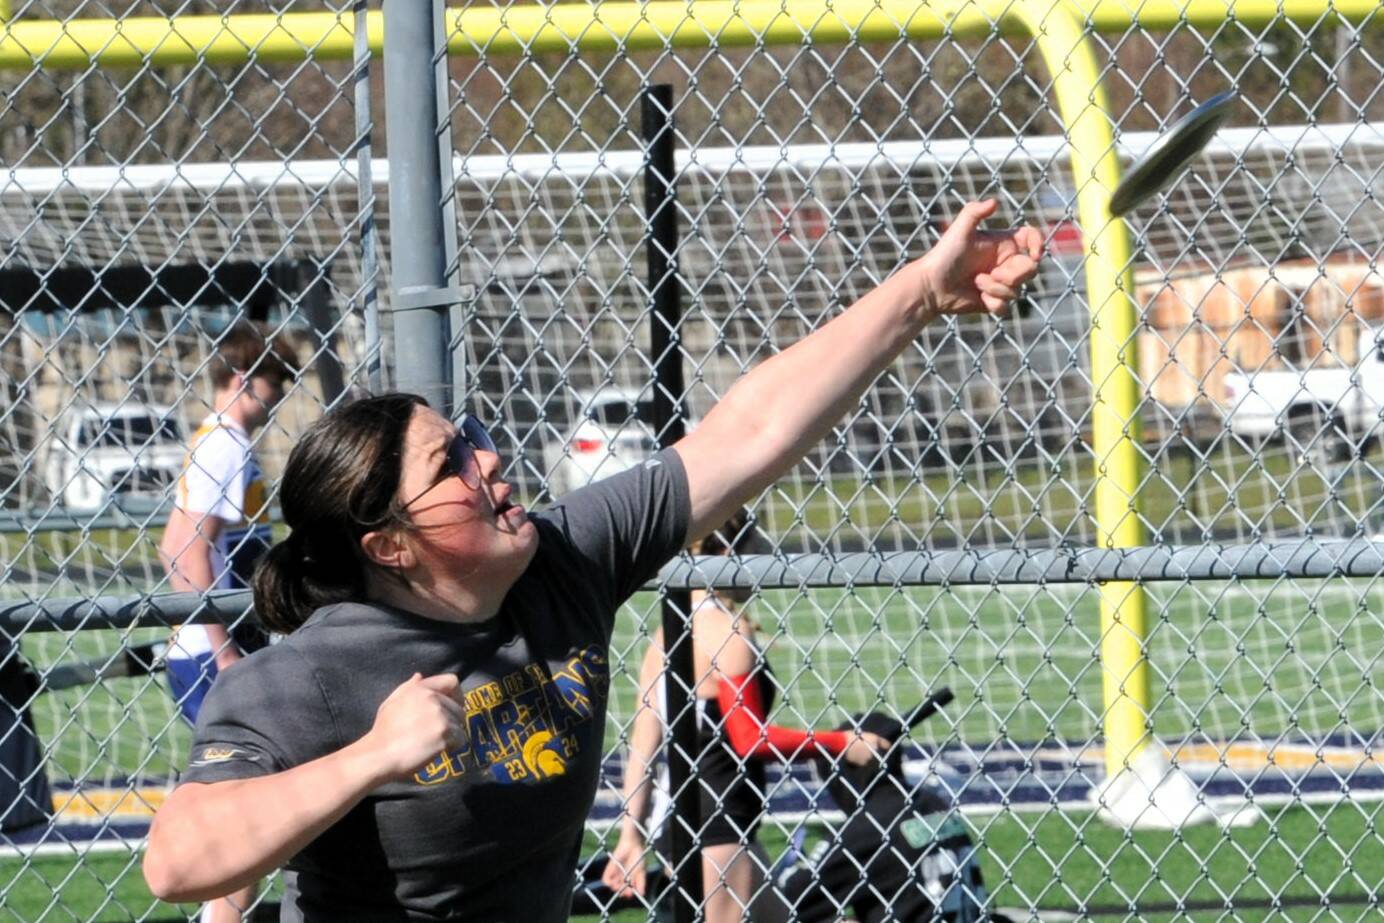 Forks’ Katelyn Wallerstedt placed second in the discus throw. Photo by Lonnie Archibald